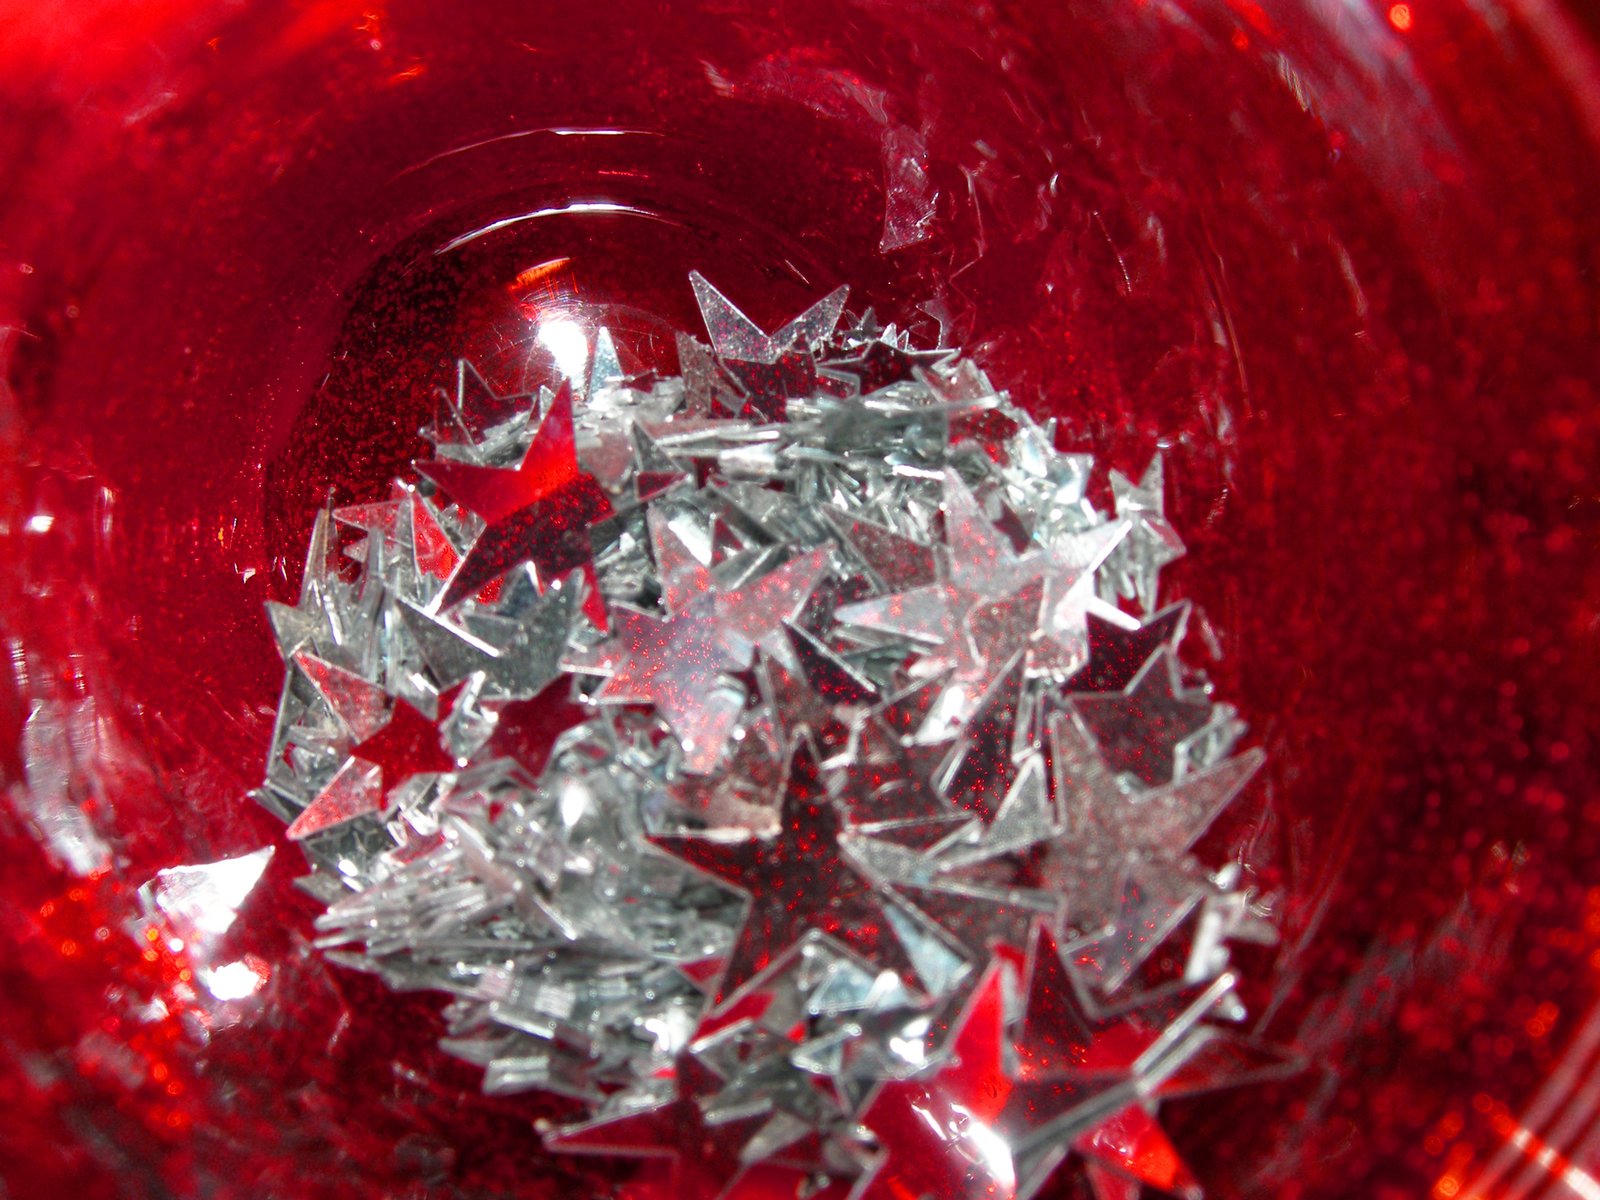 a glass bowl with some small pieces of frosted glass in it